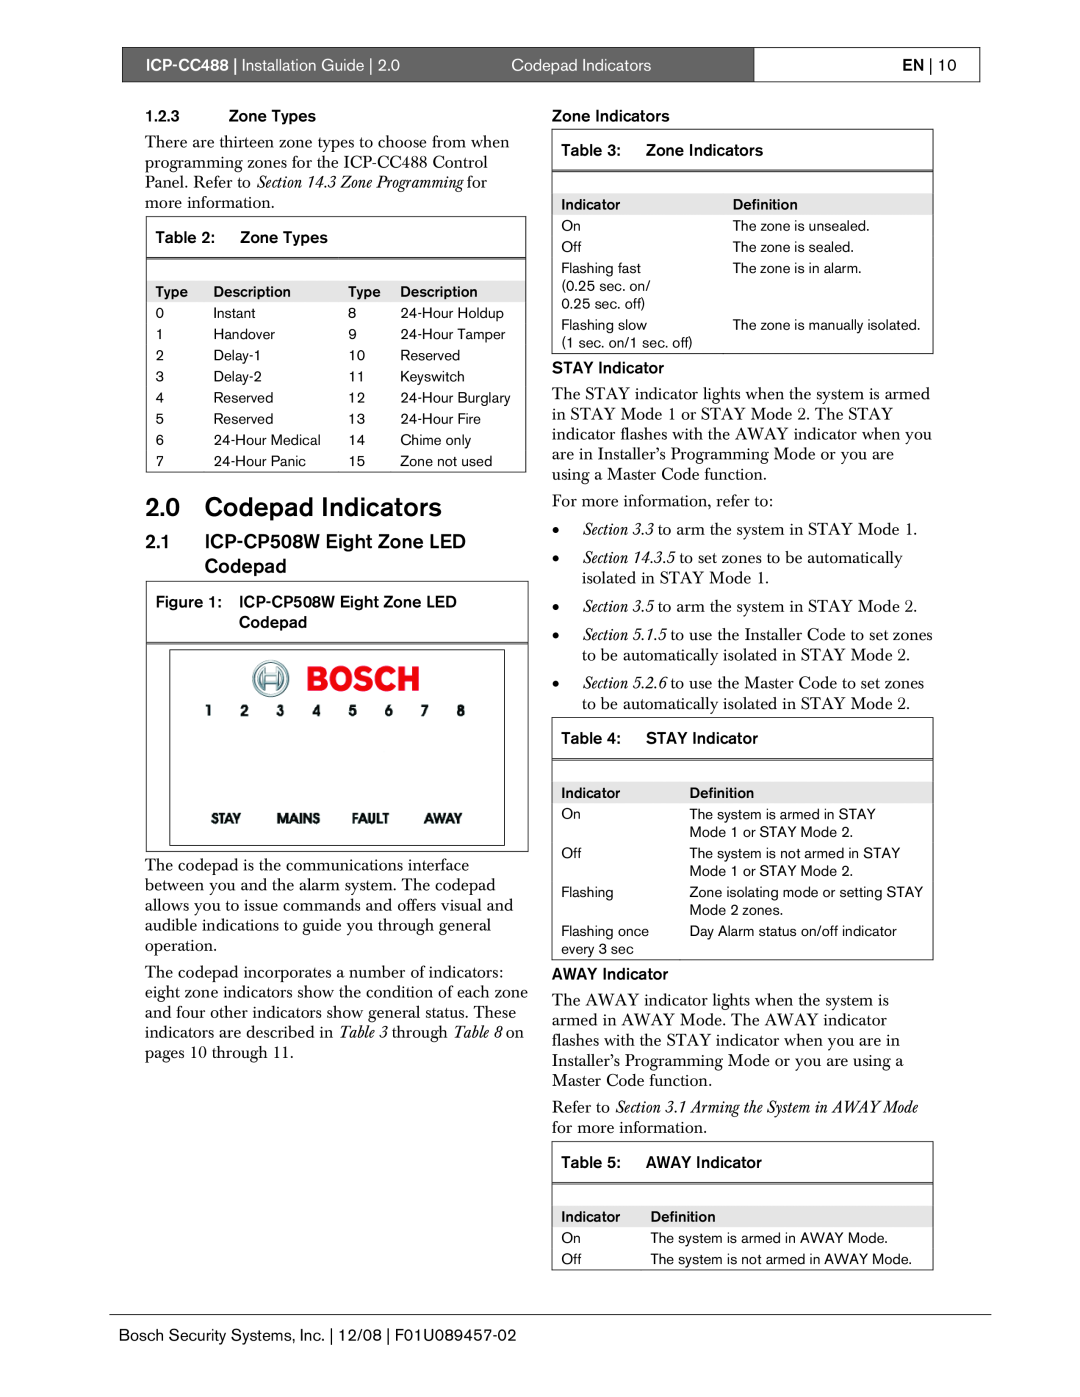 Bosch Appliances manual 2.0Codepad Indicators, 2.1ICP-CP508WEight Zone LED Codepad, ICP-CC488 Installation Guide 